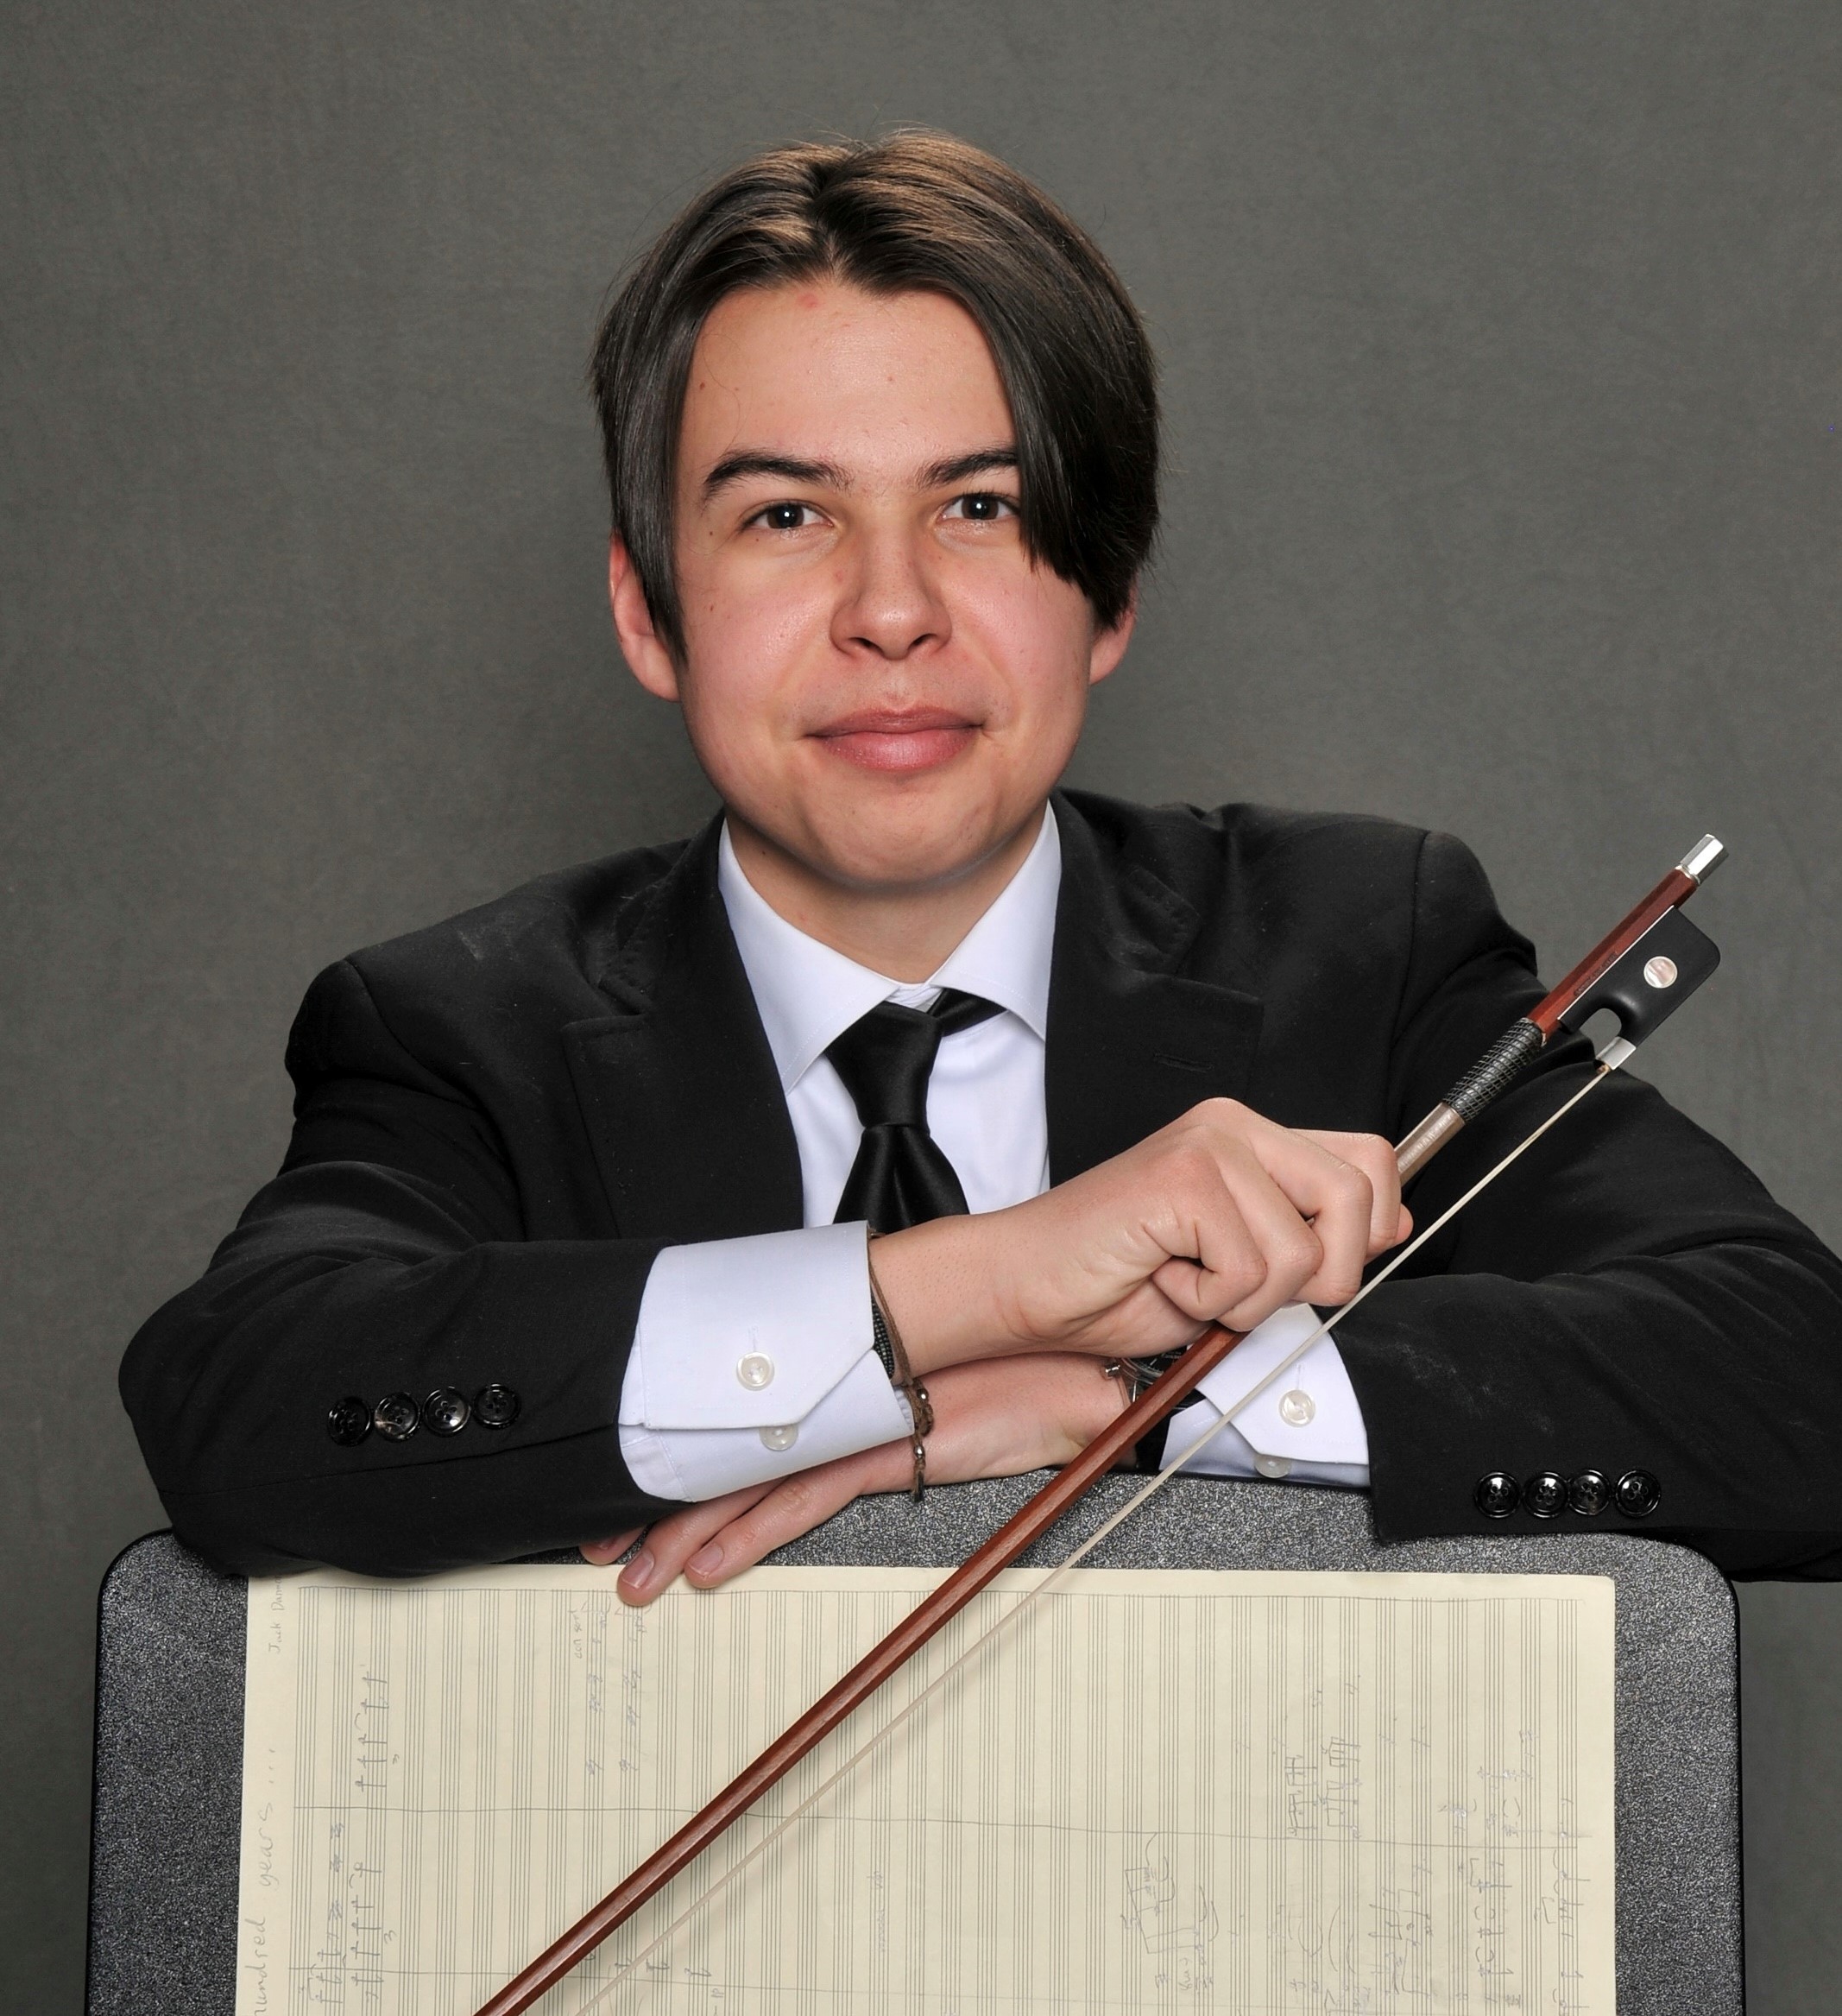 young man in suit holding cello bow